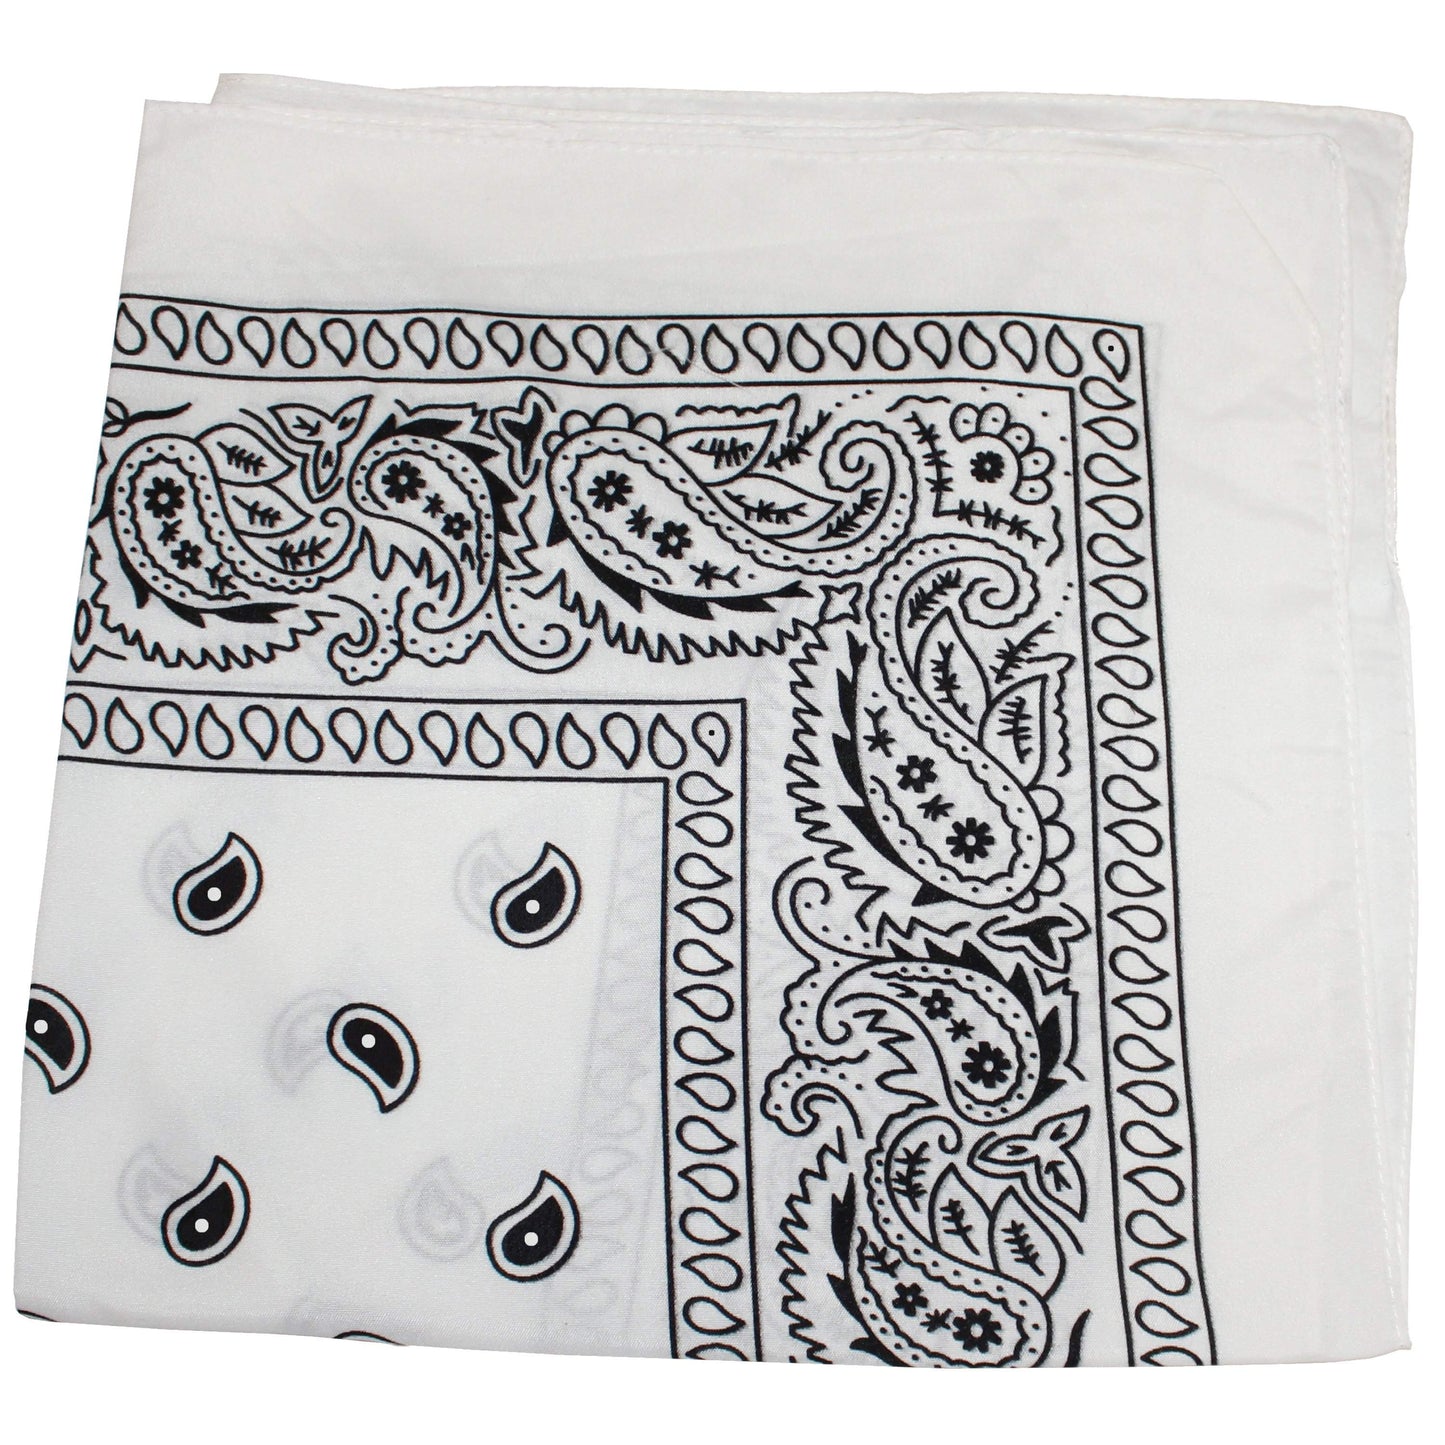 Qraftsy Polyester Paisley XL Bandanas 27 x 27 Inches / 68.58 x 68.58 cm - 12 Pack